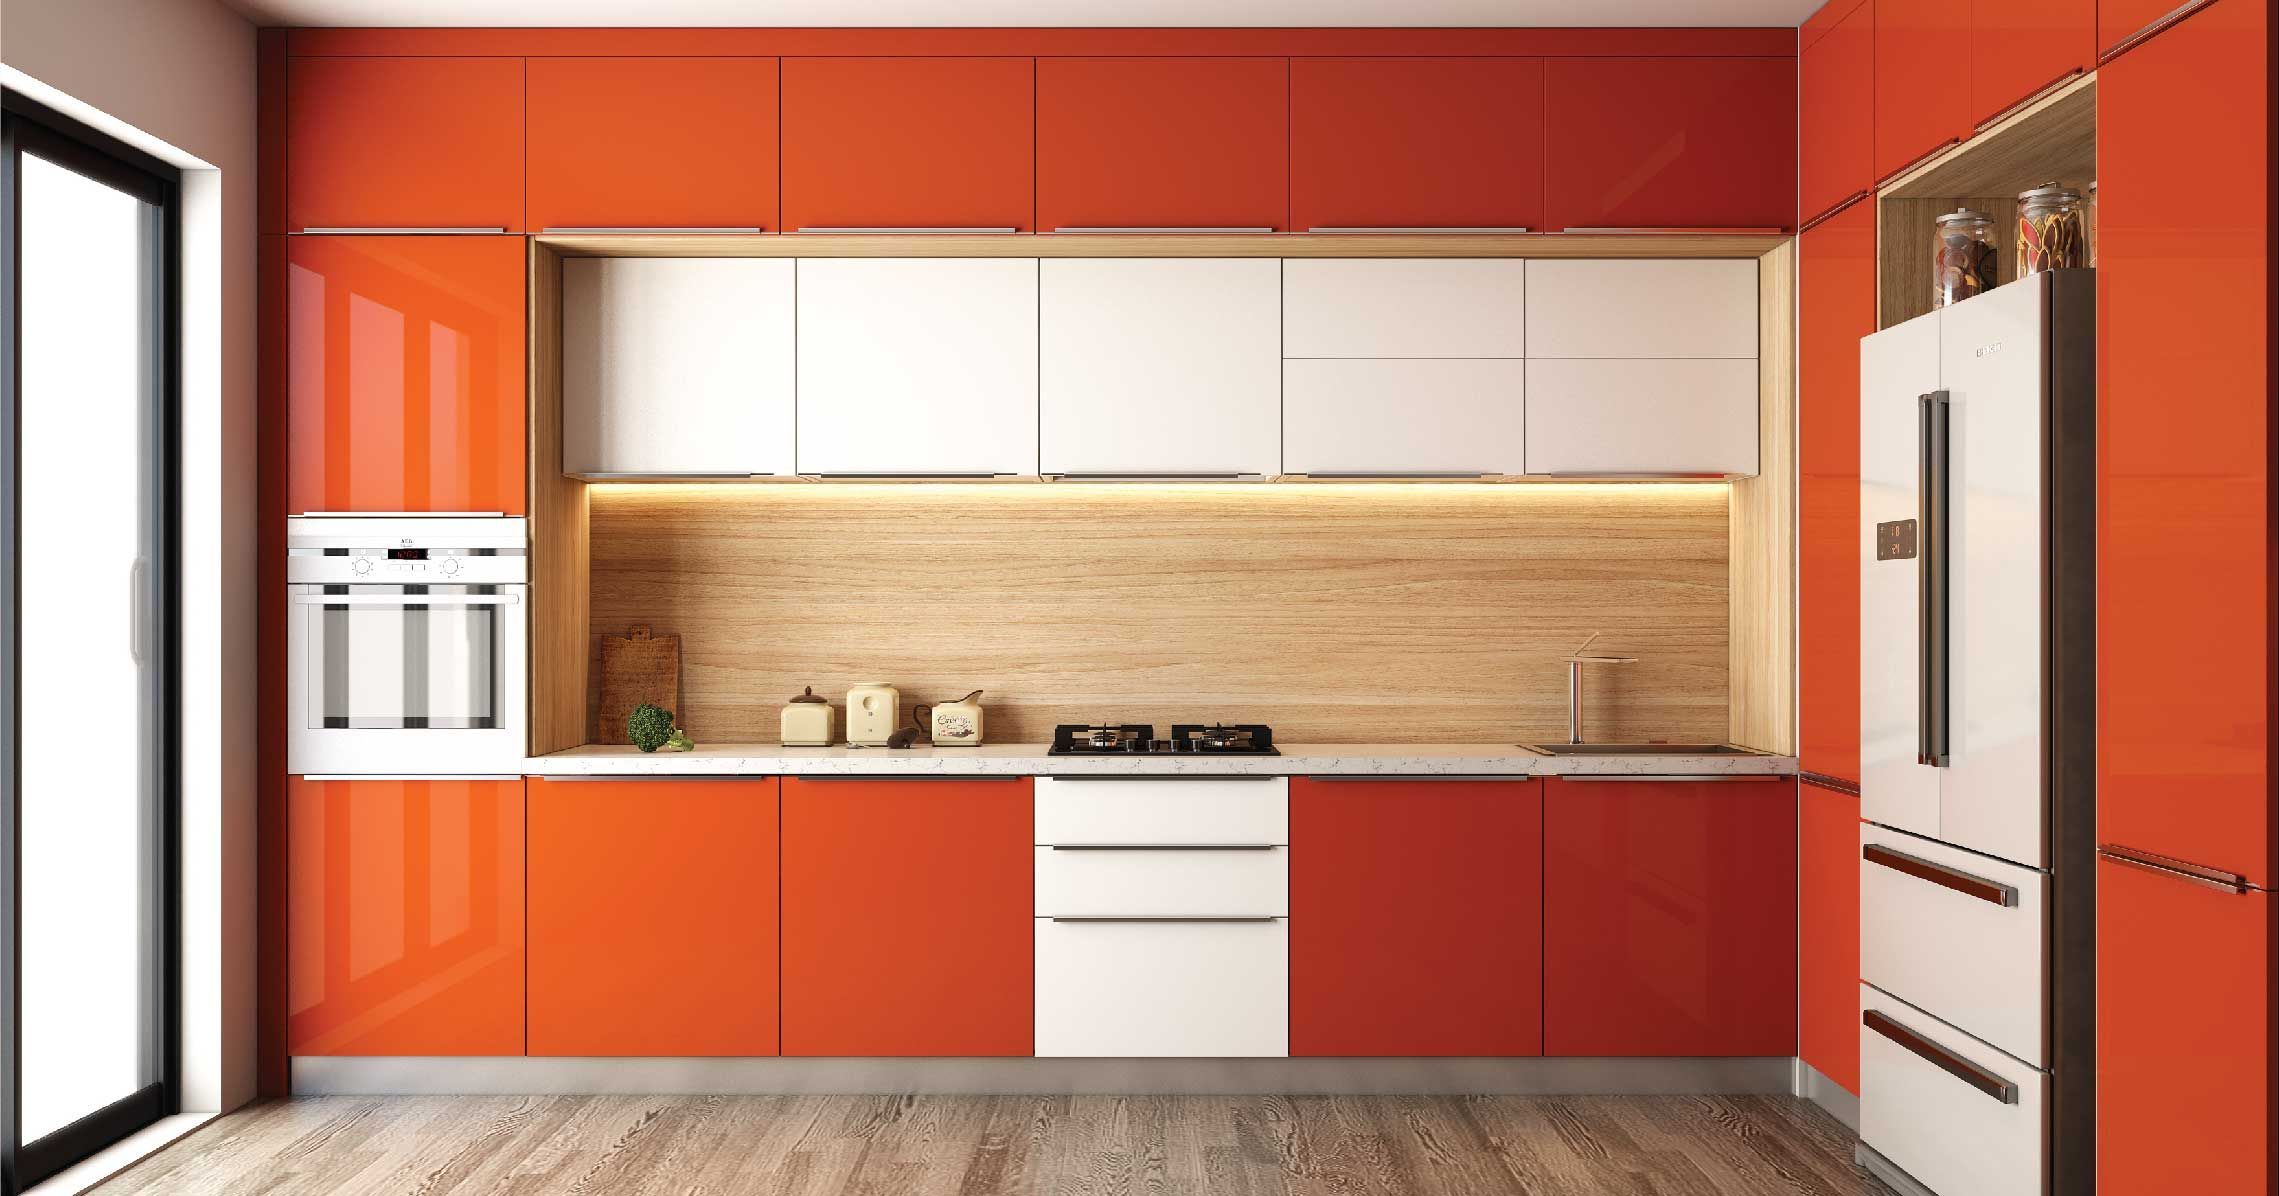 6 ways to transform your kitchen cabinets